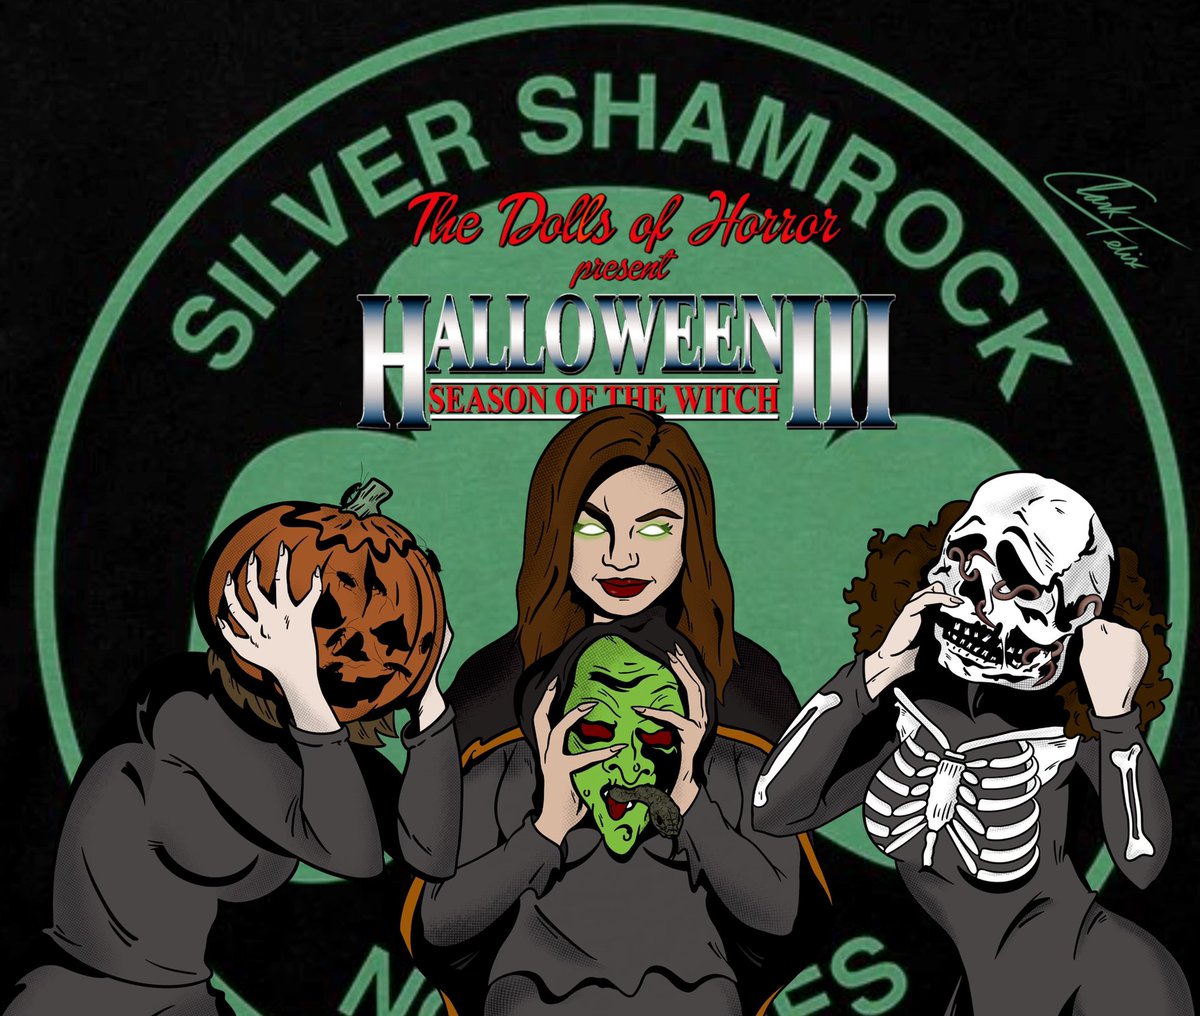 There’s 2 more days ‘till Halloween and for our final installment for the Spooky Season Tori makes her return for Halloween 3! So watch out for the danger noodles because you’re in for a treat with this The Dolls of Horror reunion!!! thedollsofhorror.com #halloween3